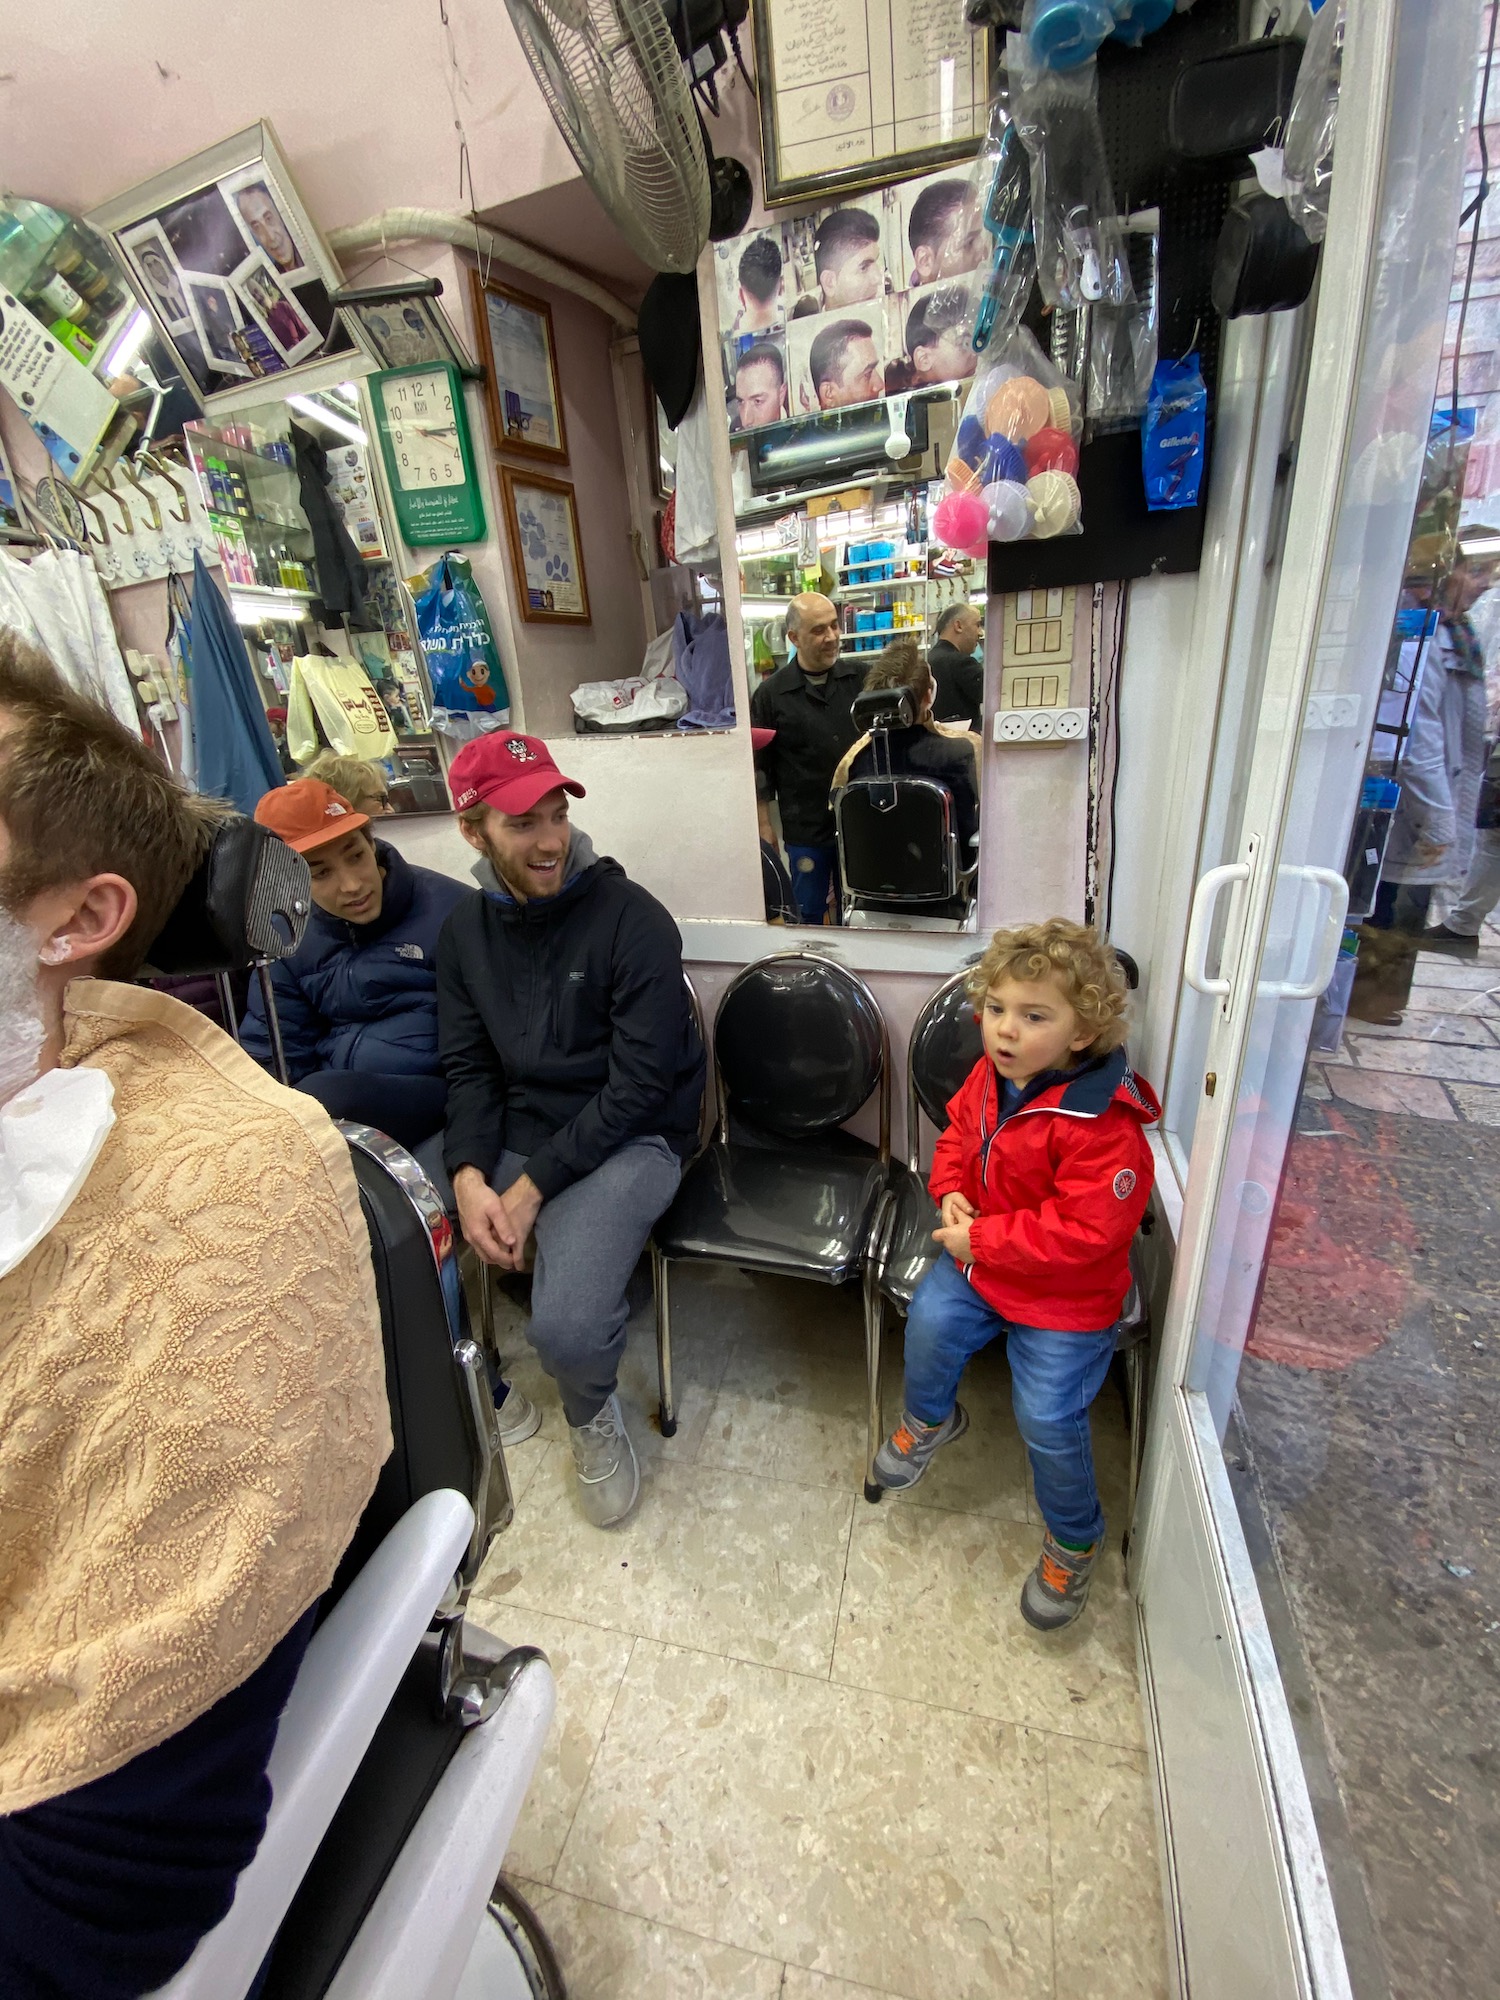 a group of people sitting in chairs in a barber shop